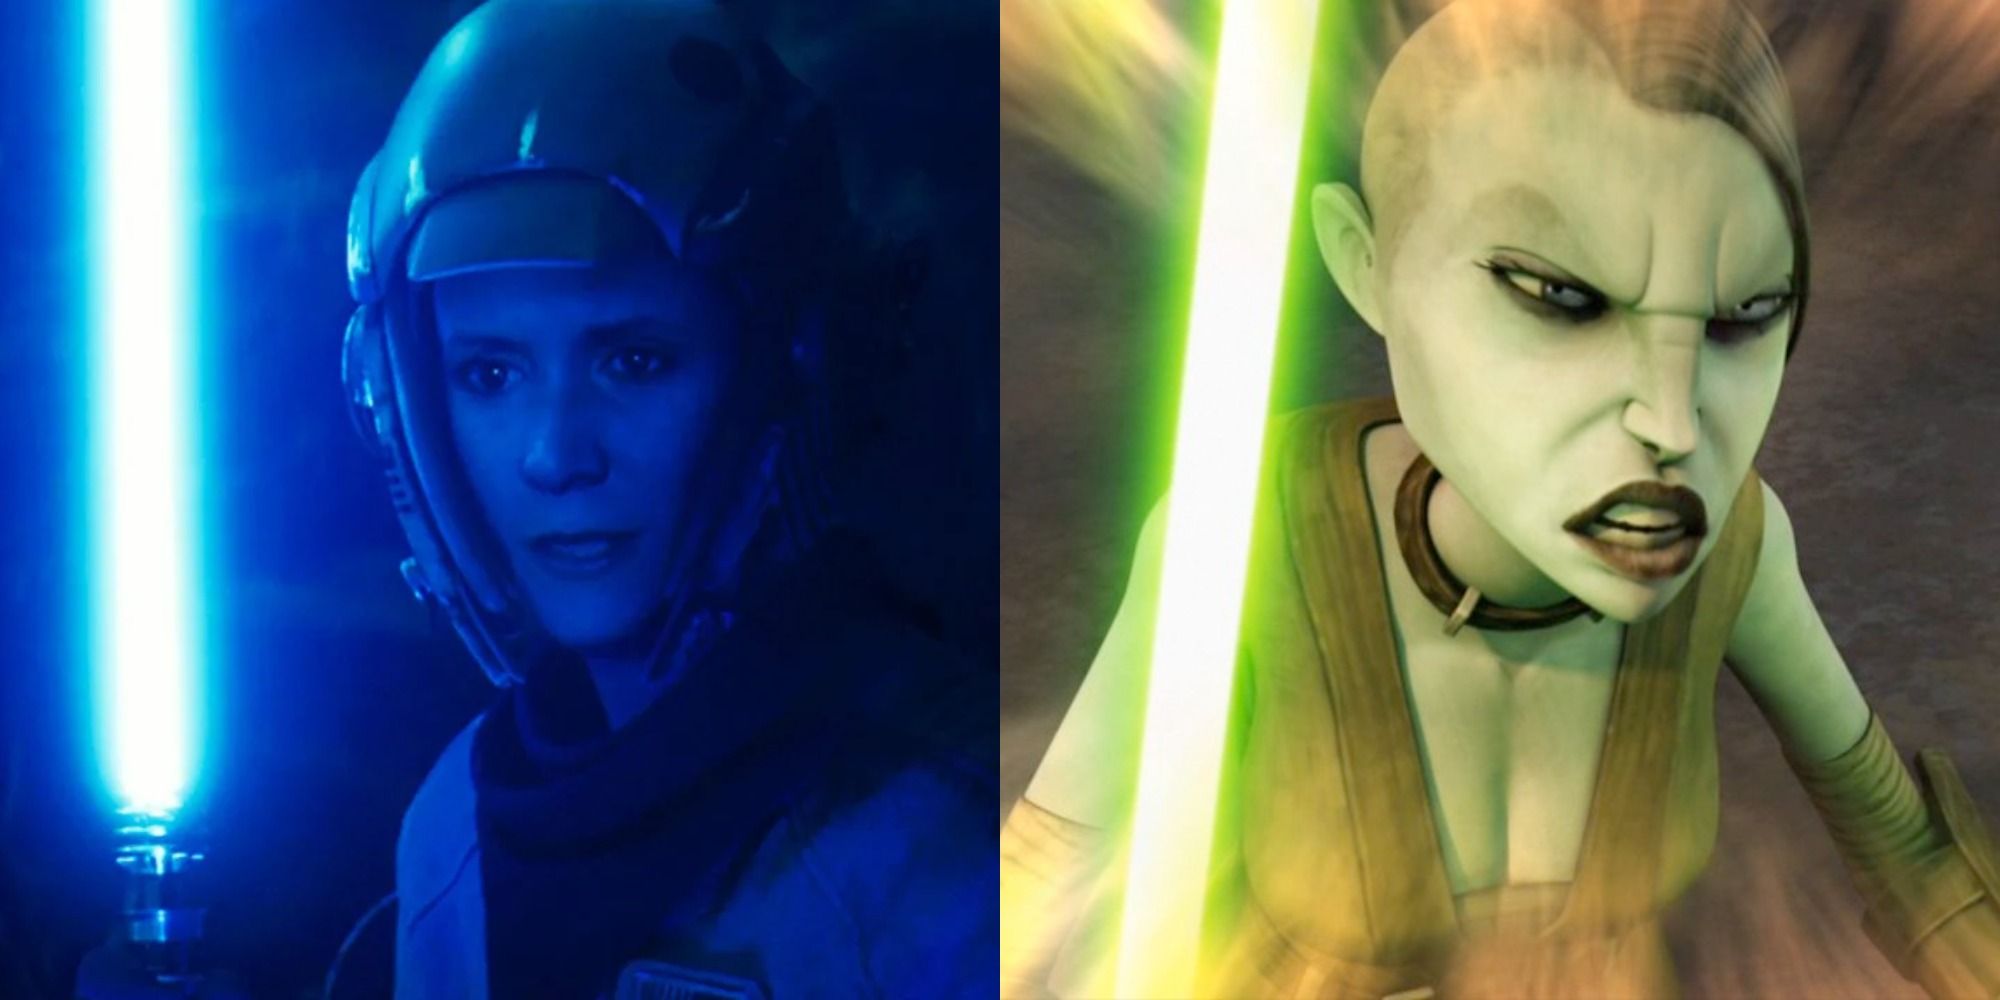 Split image of Leia flashback in The Rise of Skywalker and Asajj Ventress flashback in The Clone Wars